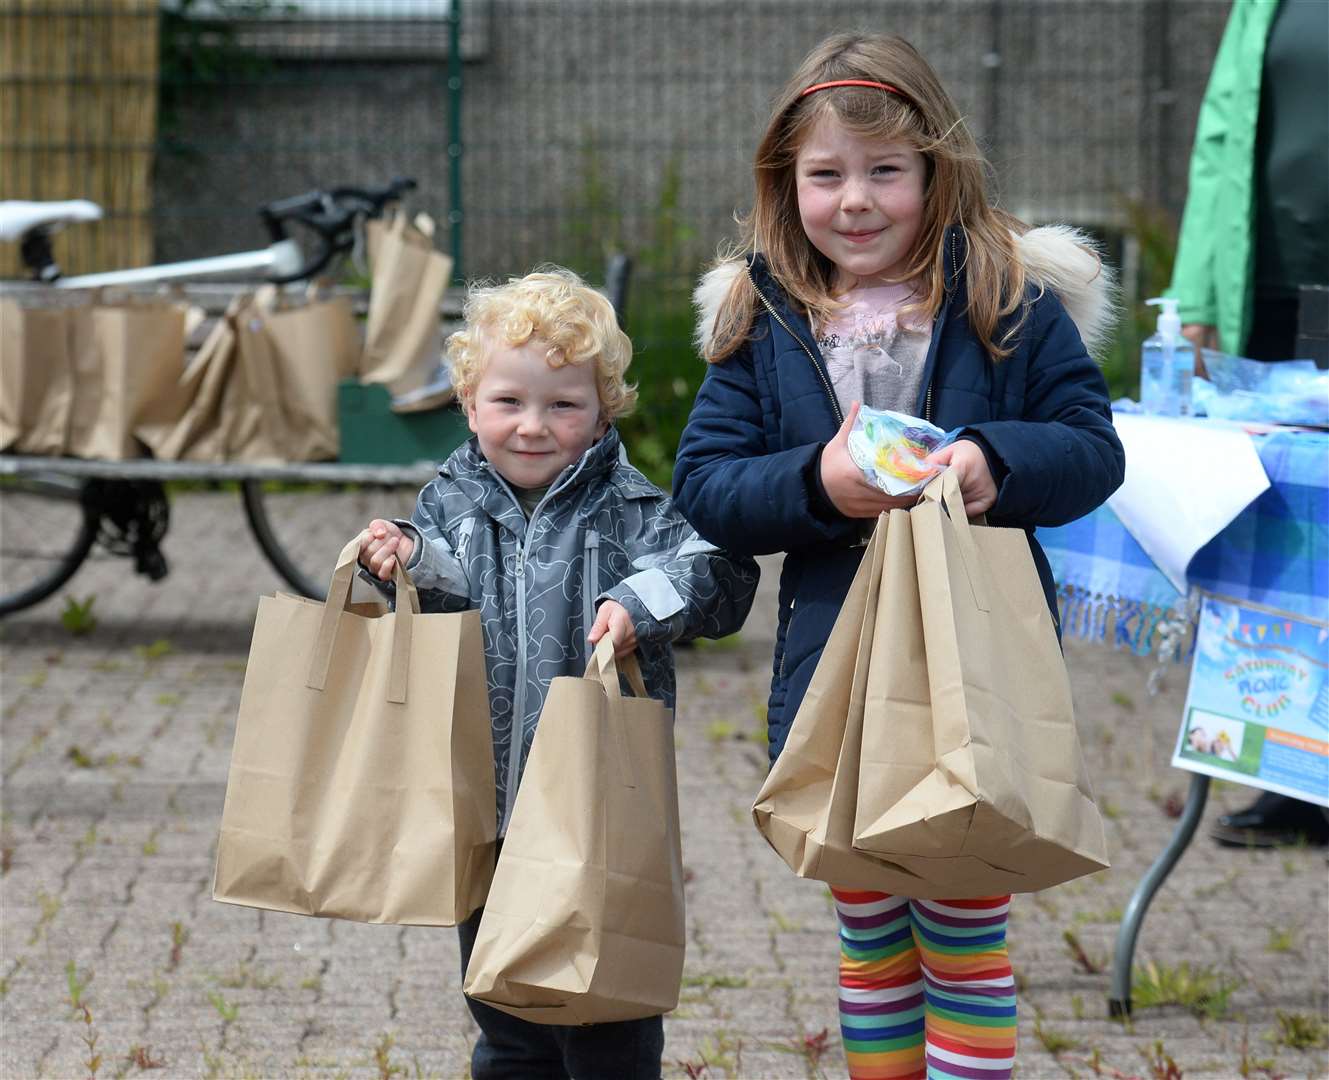 Struan and Lily Macdonald with their bags.